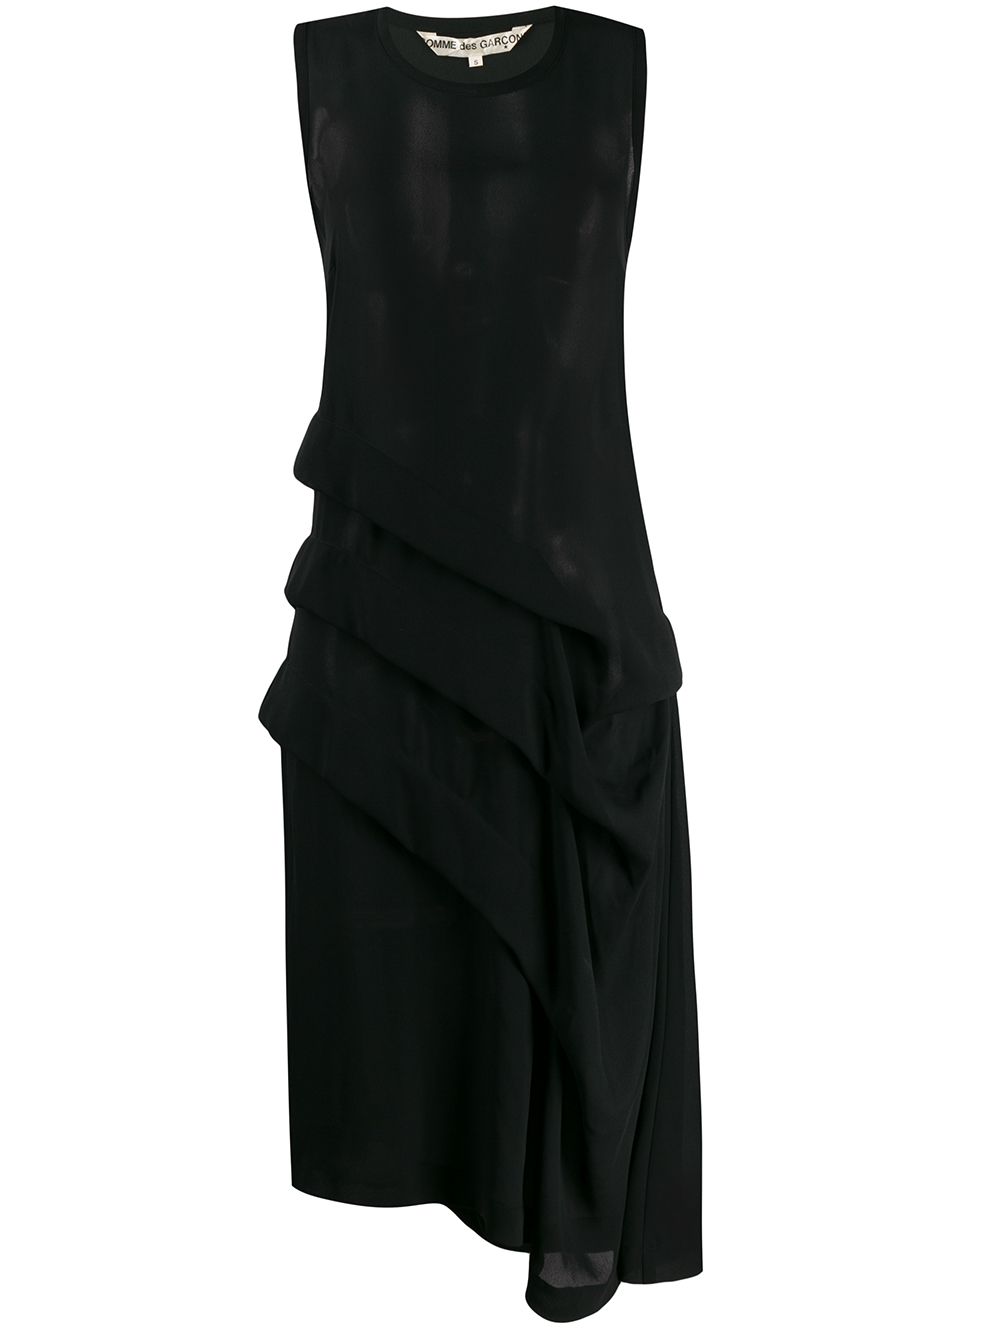 Comme Des Garçons Pre-Owned 1991 sheer layered asymmetric dress - Black von Comme Des Garçons Pre-Owned